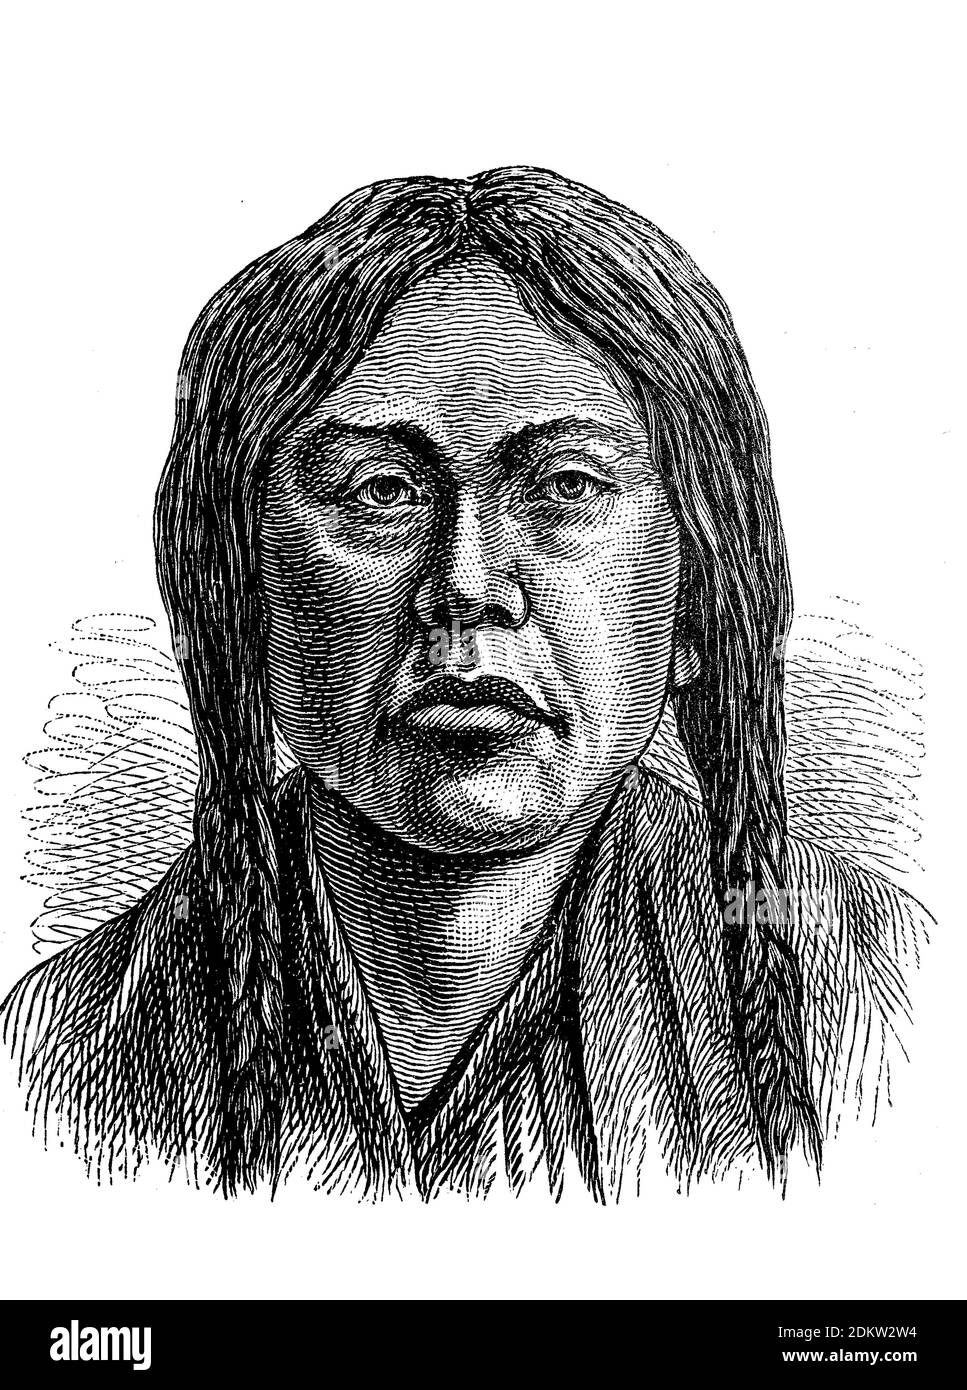 Indians, here a man of the Mexican Indians, illustration from 1880  /  Indianer, hier ein Mann der mexikanischen Indianer, Illustration aus 1880, Historisch, historical, digital improved reproduction of an original from the 19th century / digitale Reproduktion einer Originalvorlage aus dem 19. Jahrhundert Stock Photo